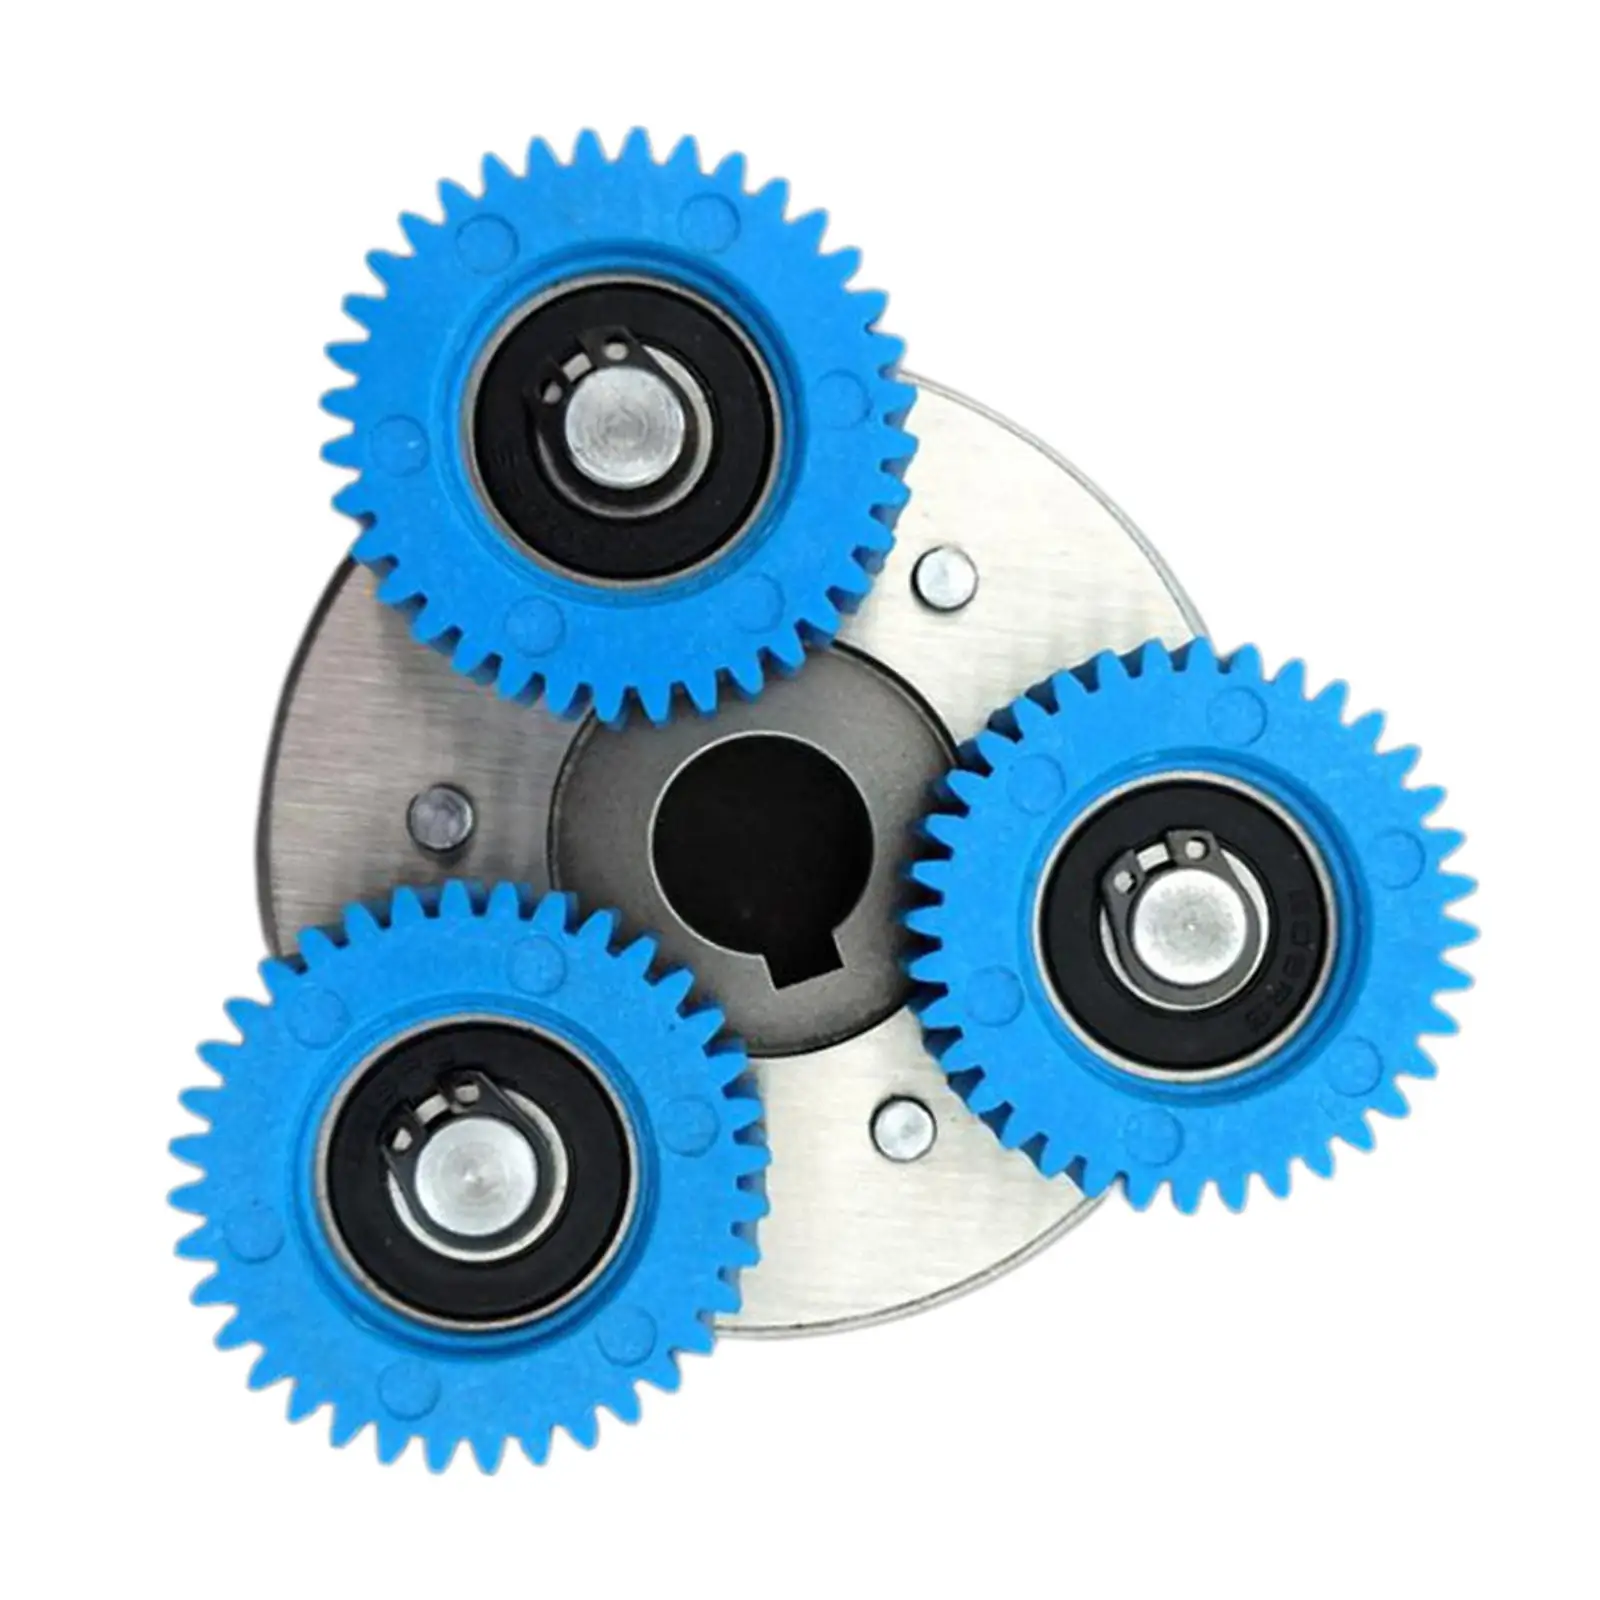 36T Planetary Gear with Clutch Set 70mm Clutch for Bafang Motor Bicycle Electric Bike